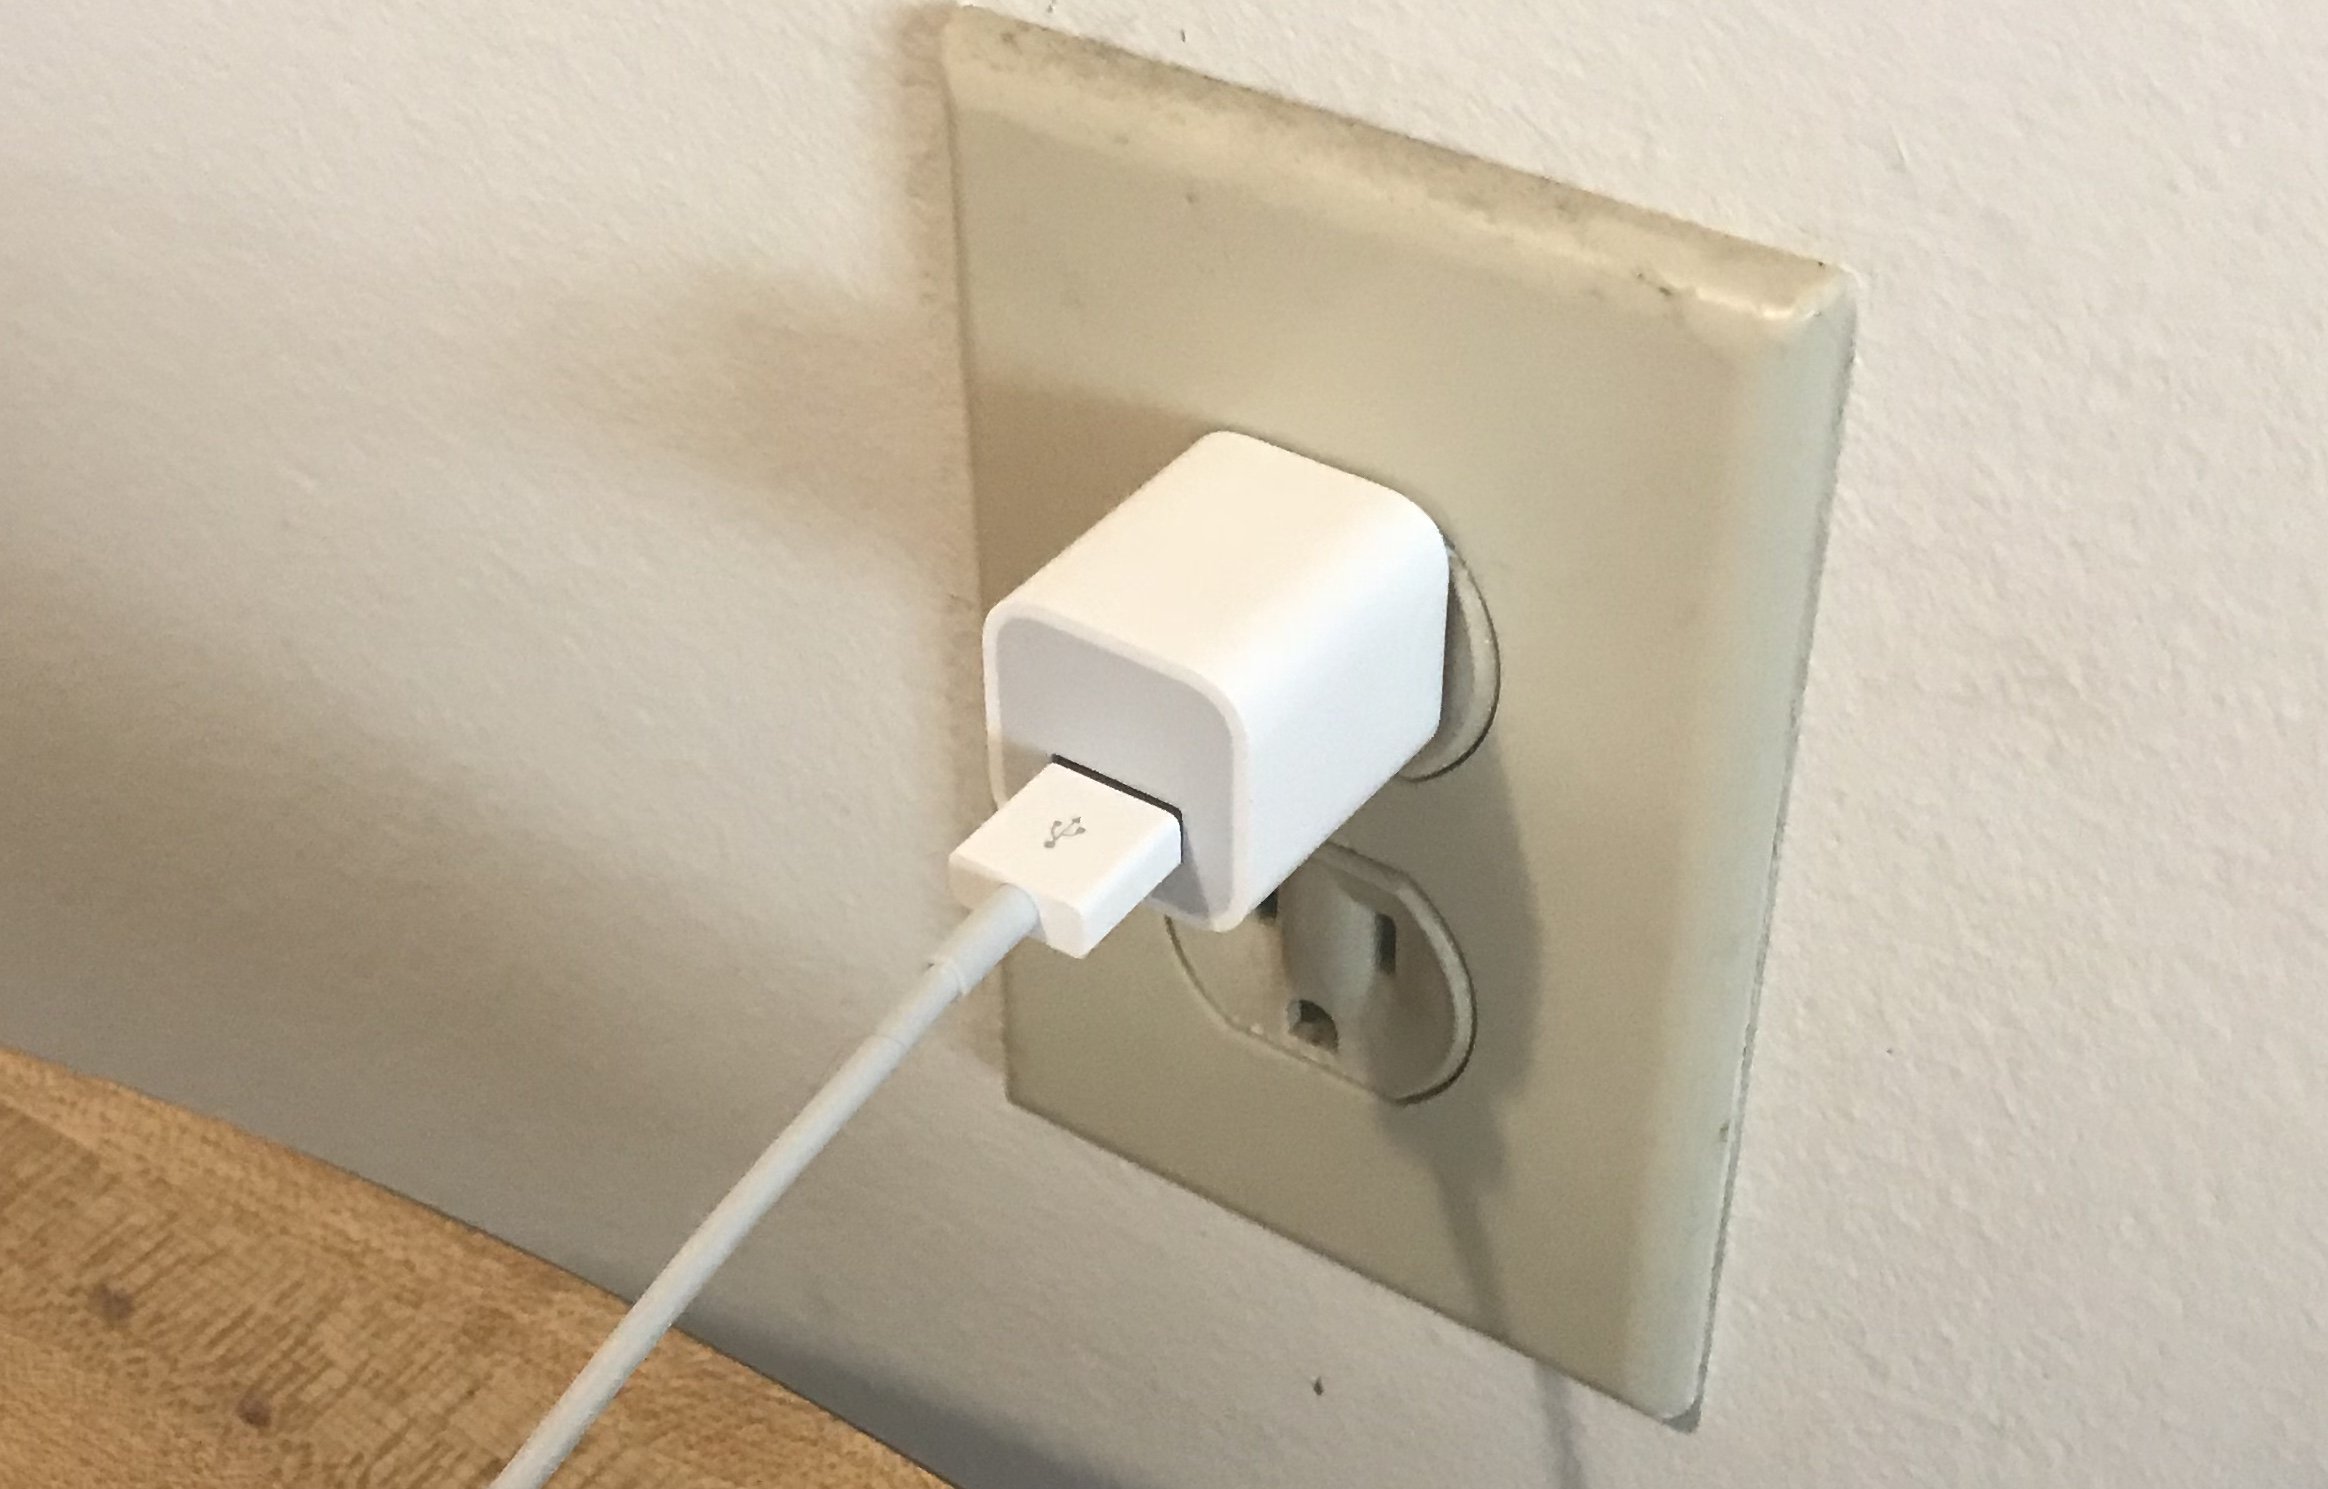 iPhone wall charger plugged in